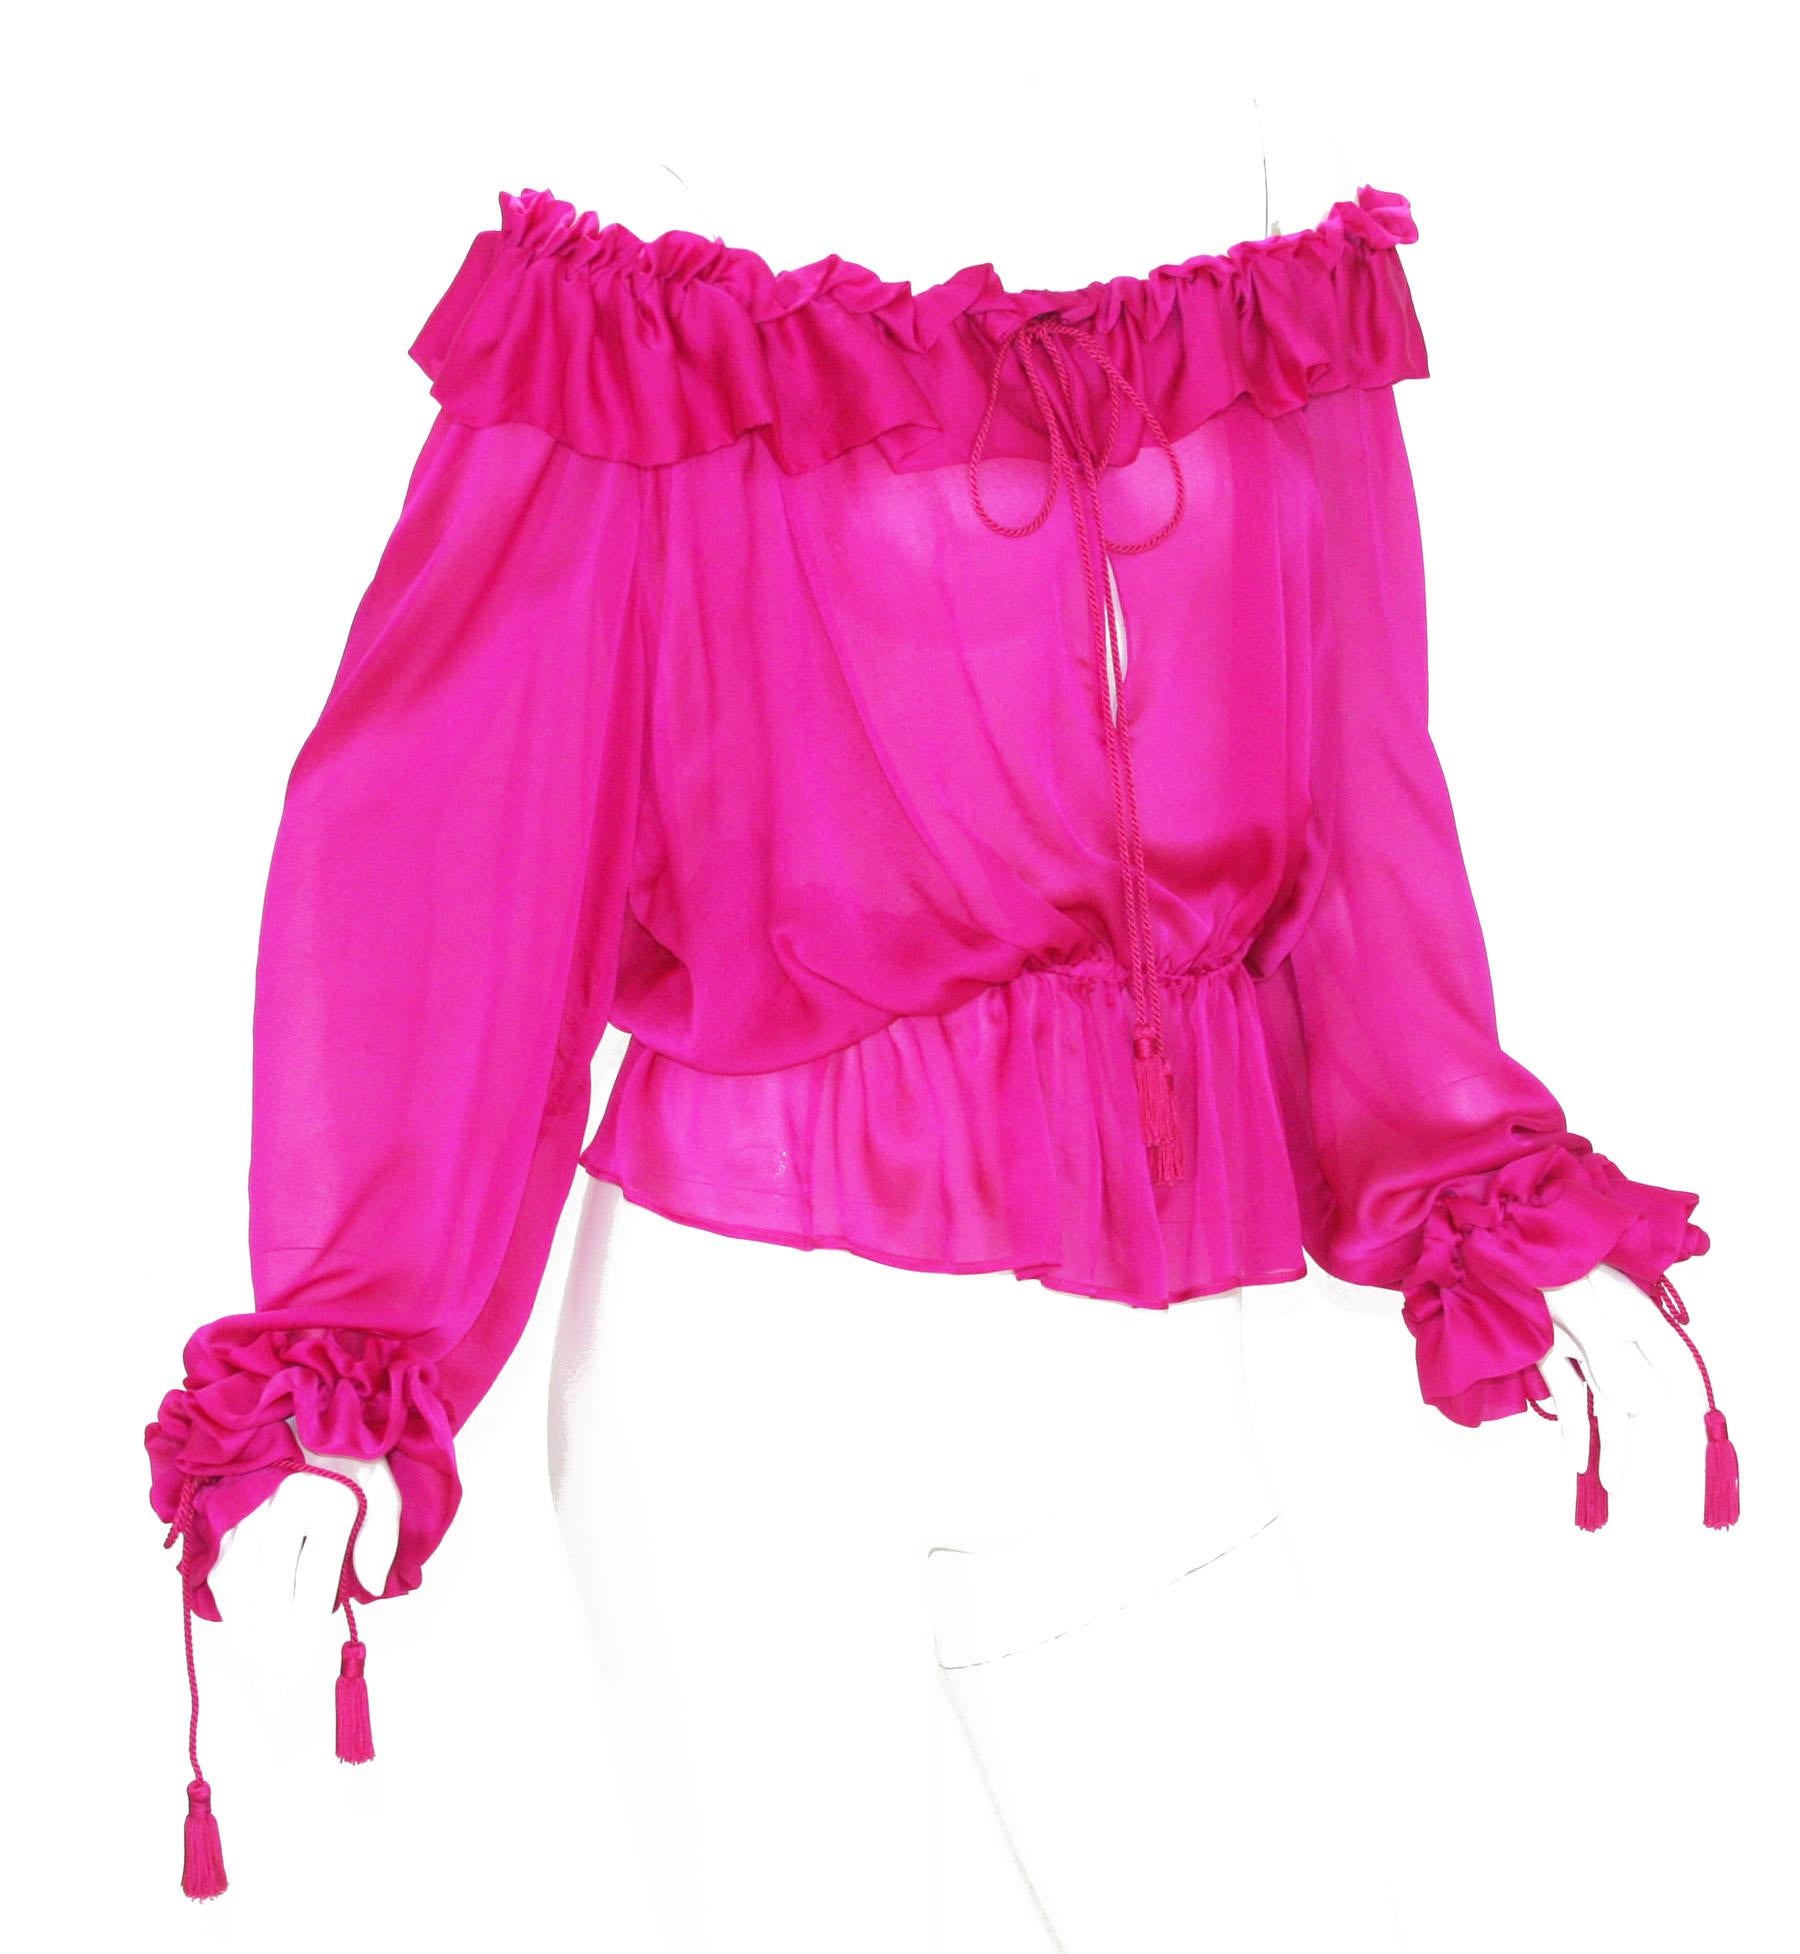 Vintage Yves Saint Laurent Rive Gauche Off-Shoulder Top Blouse
Designer size - French 38 ( US 6 )
100% Silk, Amazing Hot Bougainvillea Color, Off-Shoulder Style, Ruffled, Keyhole at Front, Decorative Rope, Stretch Top and Waist.
Measurements: Length